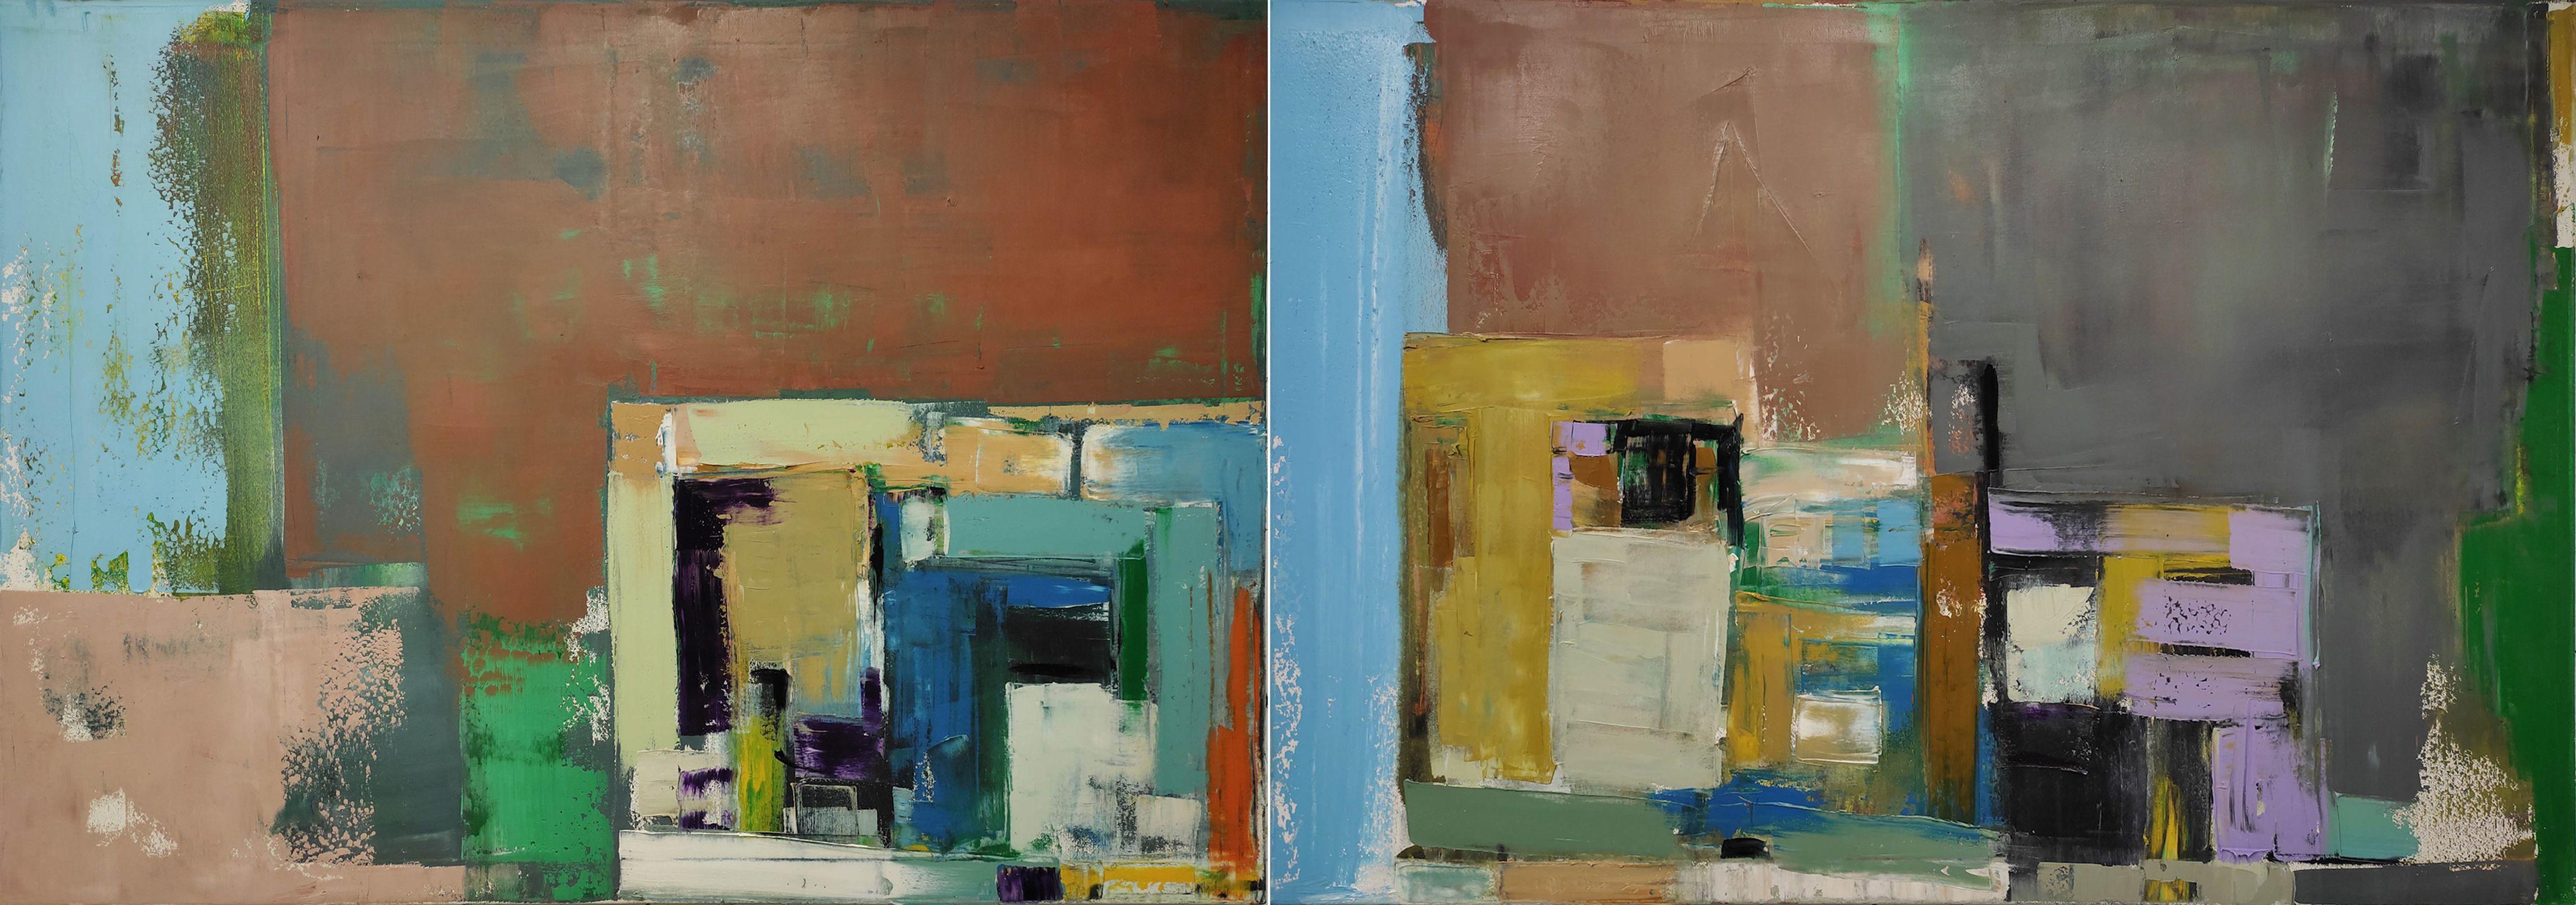 Karina Antonczak Abstract Painting - oil painting, diptych, "Layer city 46", stretched, Painting, Oil on Canvas